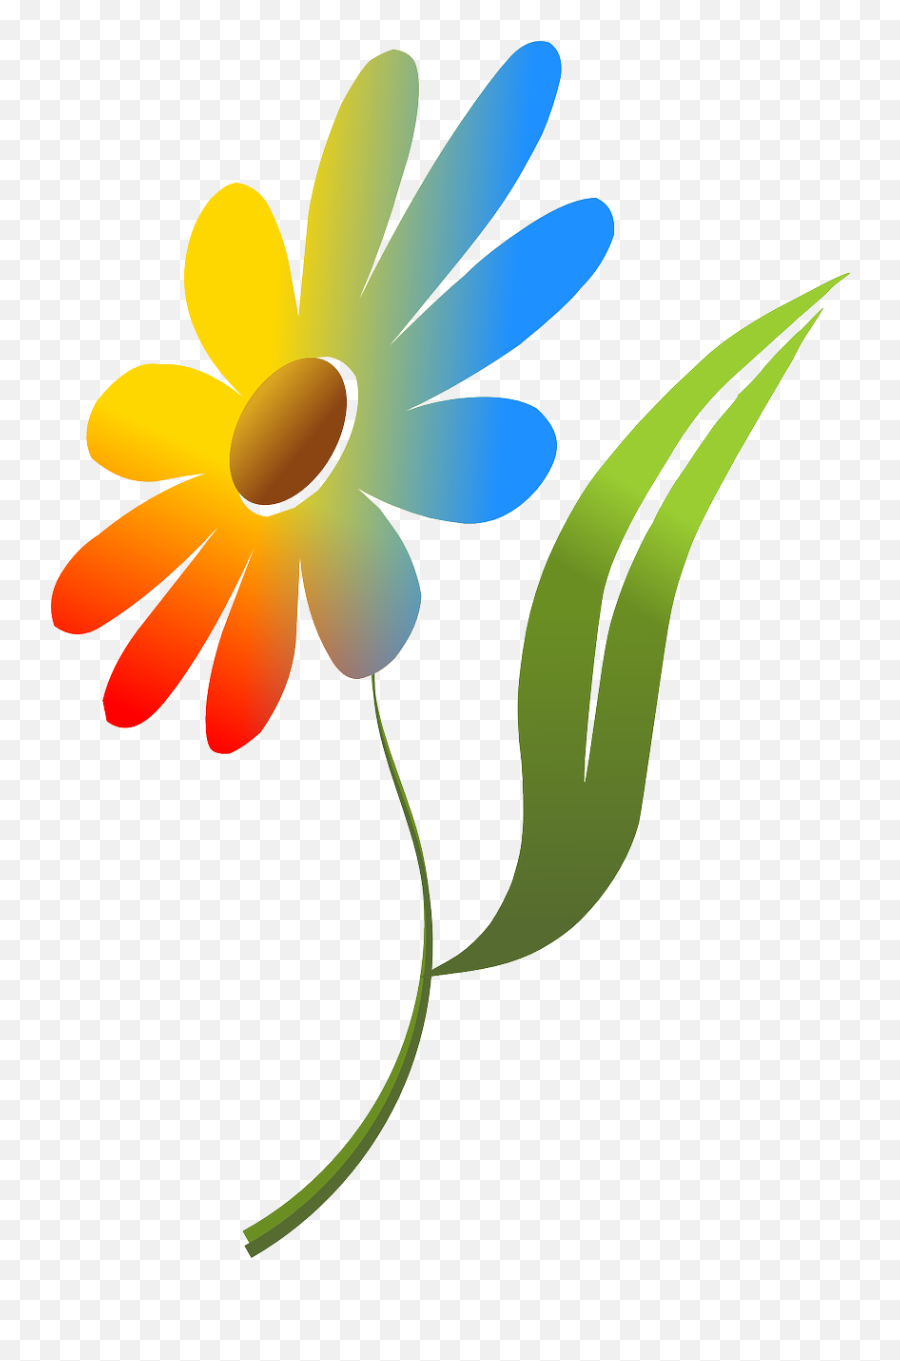 Download Free Photo Of Flowernaturecolorfulredblue - Colorful Flower Image Png,Green And Yellow Flower Logo